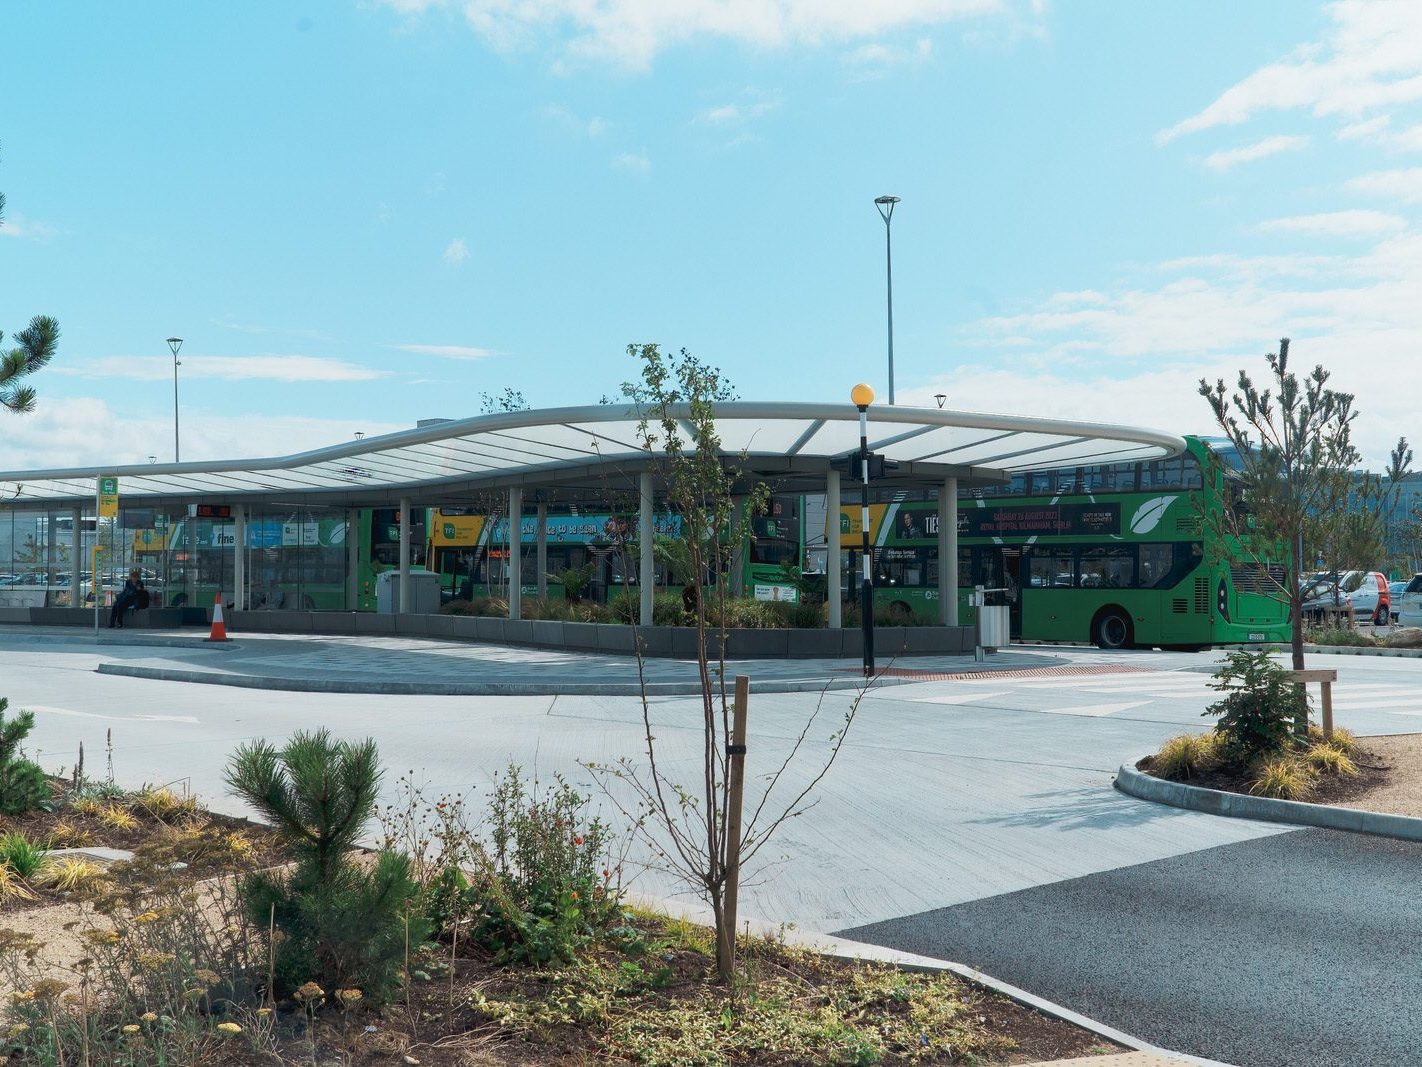 THE NEW BUS PLAZA THAT I DID NOT KNOW ABOUT [AT LIFFEY VALLEY SHOPPING CENTRE] 006